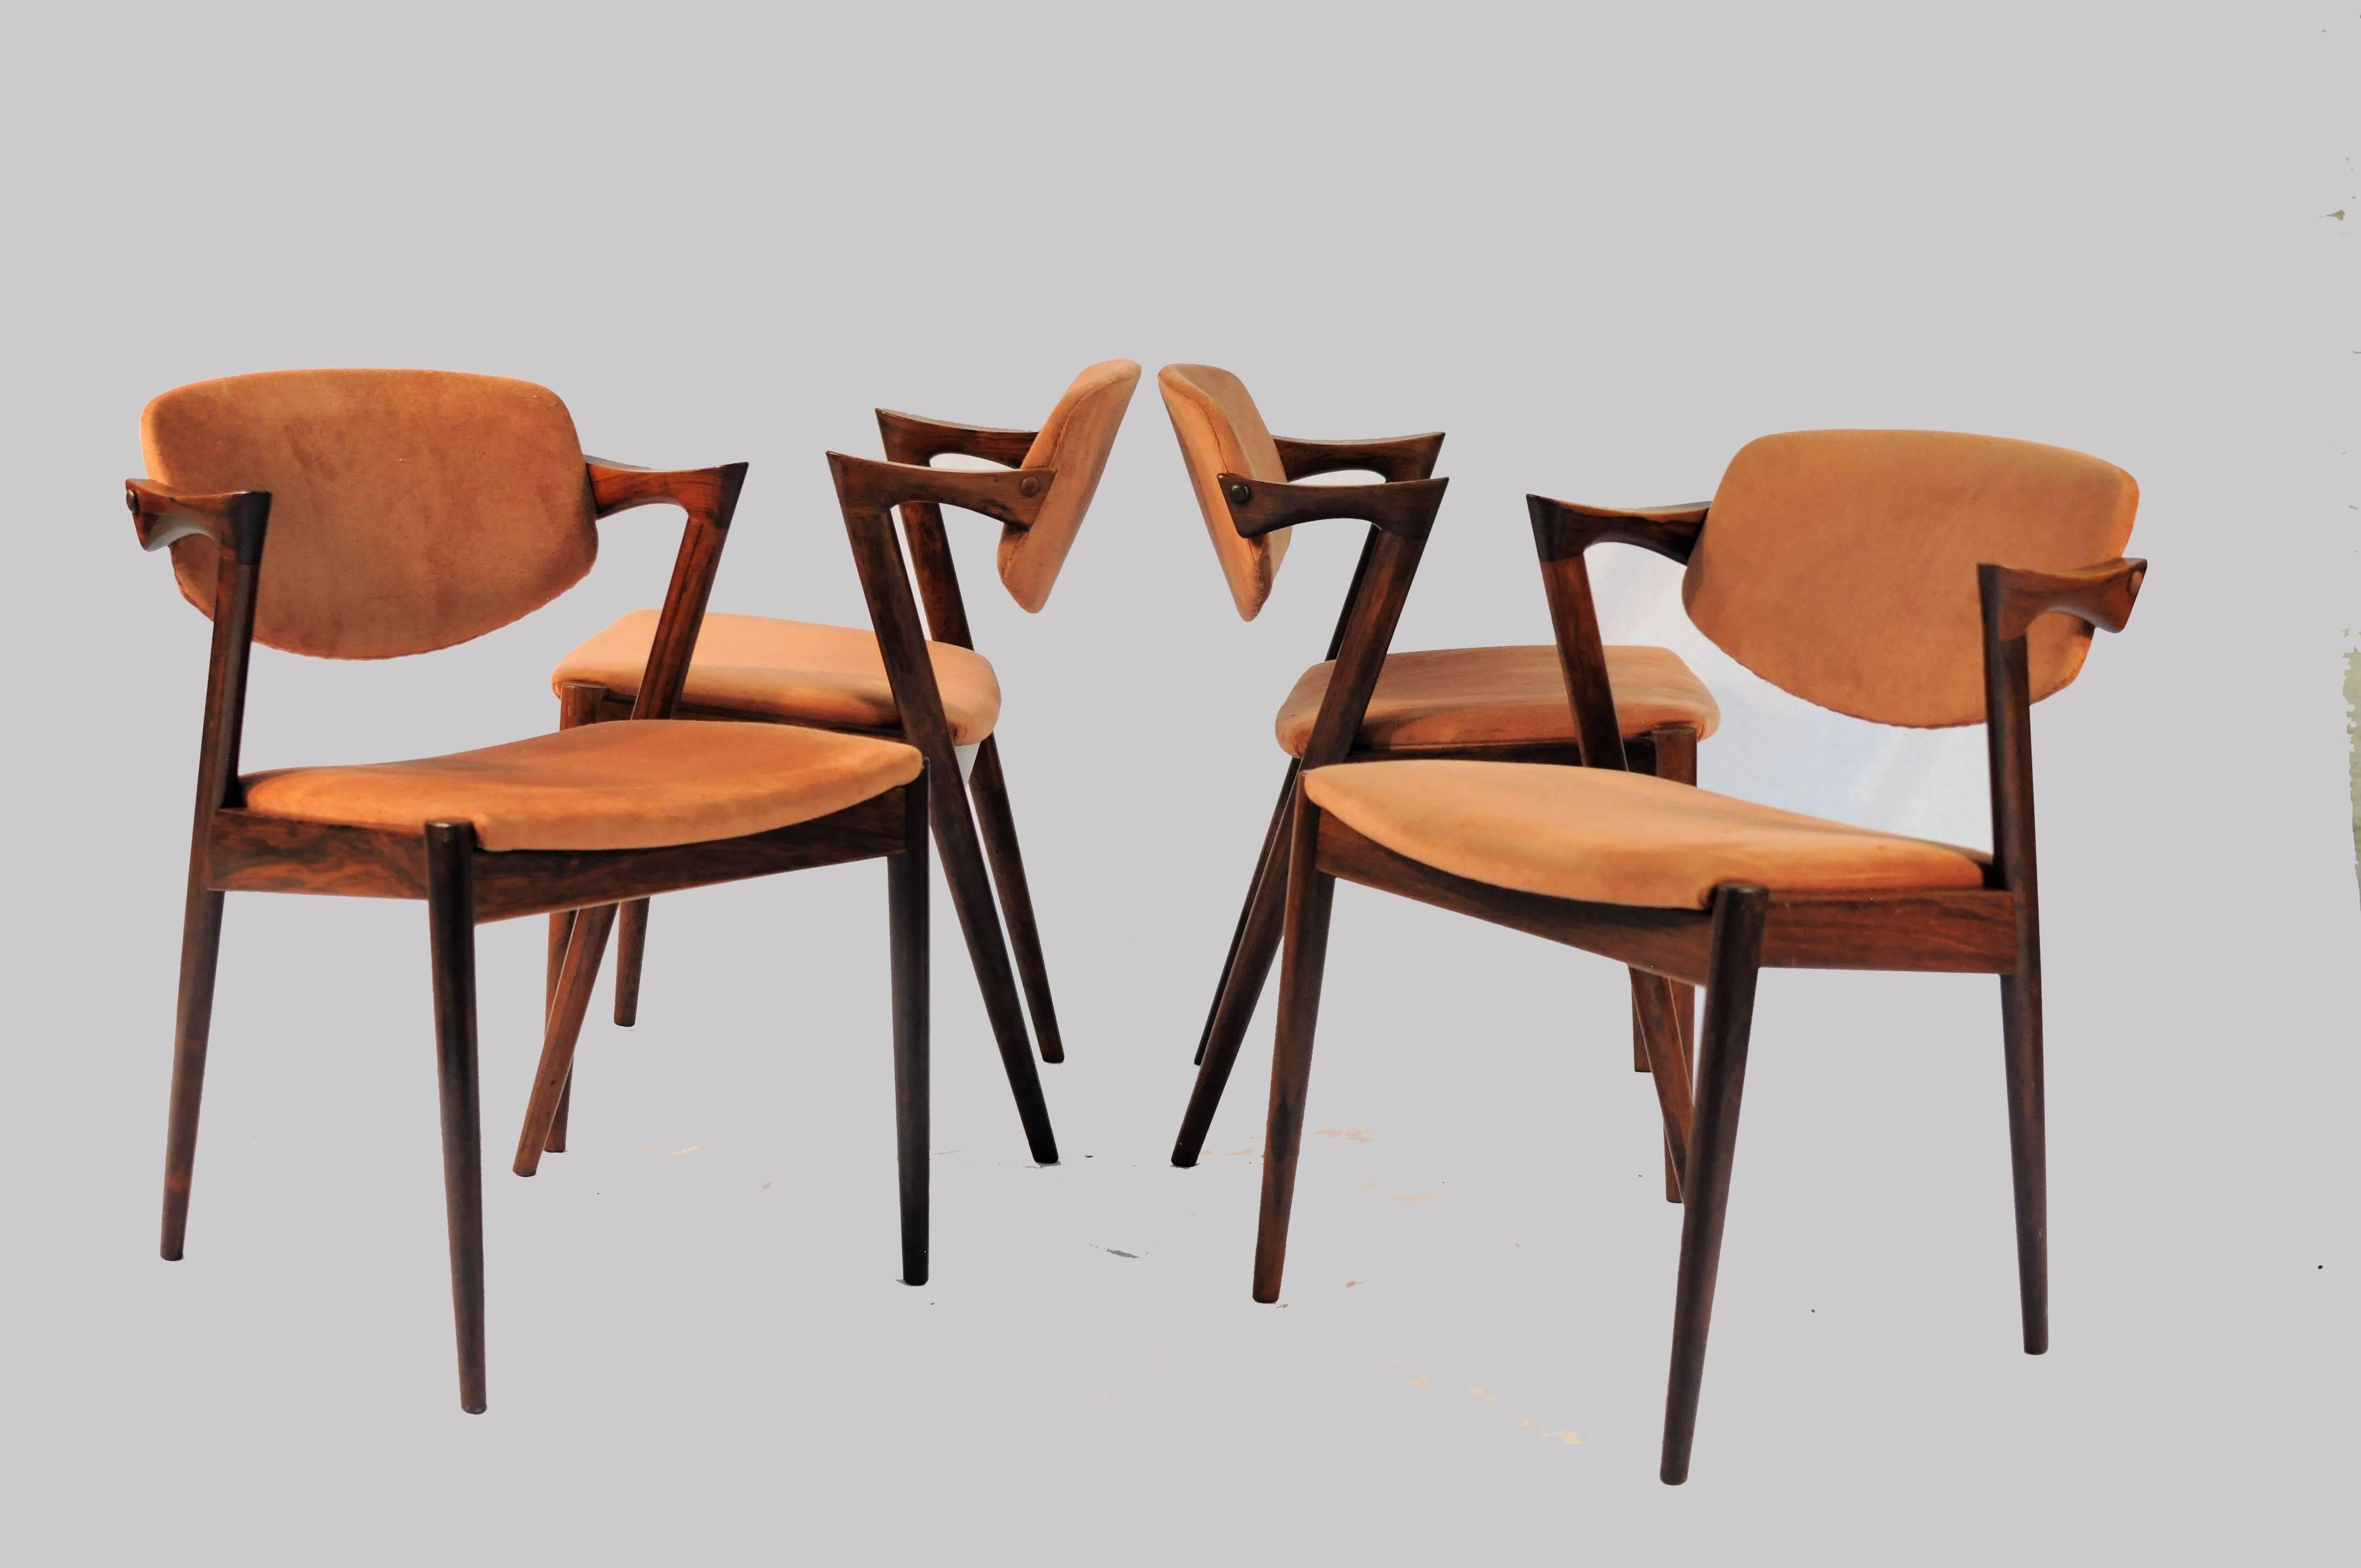 Model 42 teak dining chairs with adjustable backrest with different types of upholstery by Kai Kristiansen for Schous Møbelfabrik.

The chairs have Kai Kristiansens typical light and elegant design that make them fit in easily where you want them in